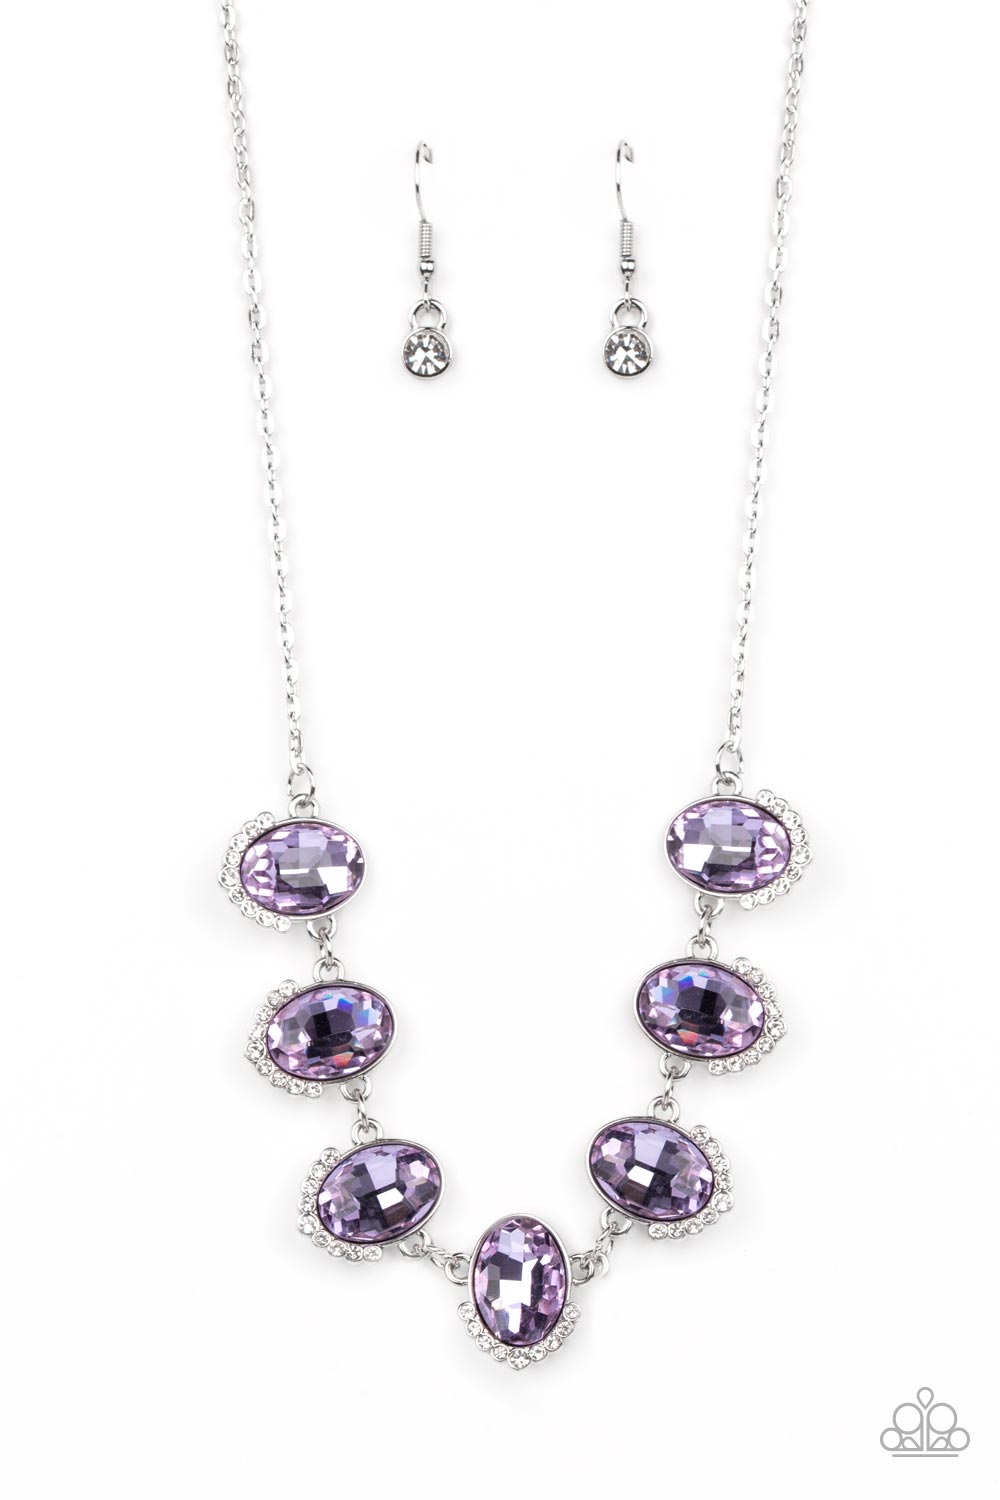 Unleash Your Sparkle Purple Necklace - Paparazzi Accessories  Dainty rows of glittery white rhinestones gently curve around the bottoms of oversized Very Peri oval gems. The sparkly frames delicately connect below the collar, creating a colorful centerpiece. Features an adjustable clasp closure.  Sold as one individual necklace. Includes one pair of matching earrings.